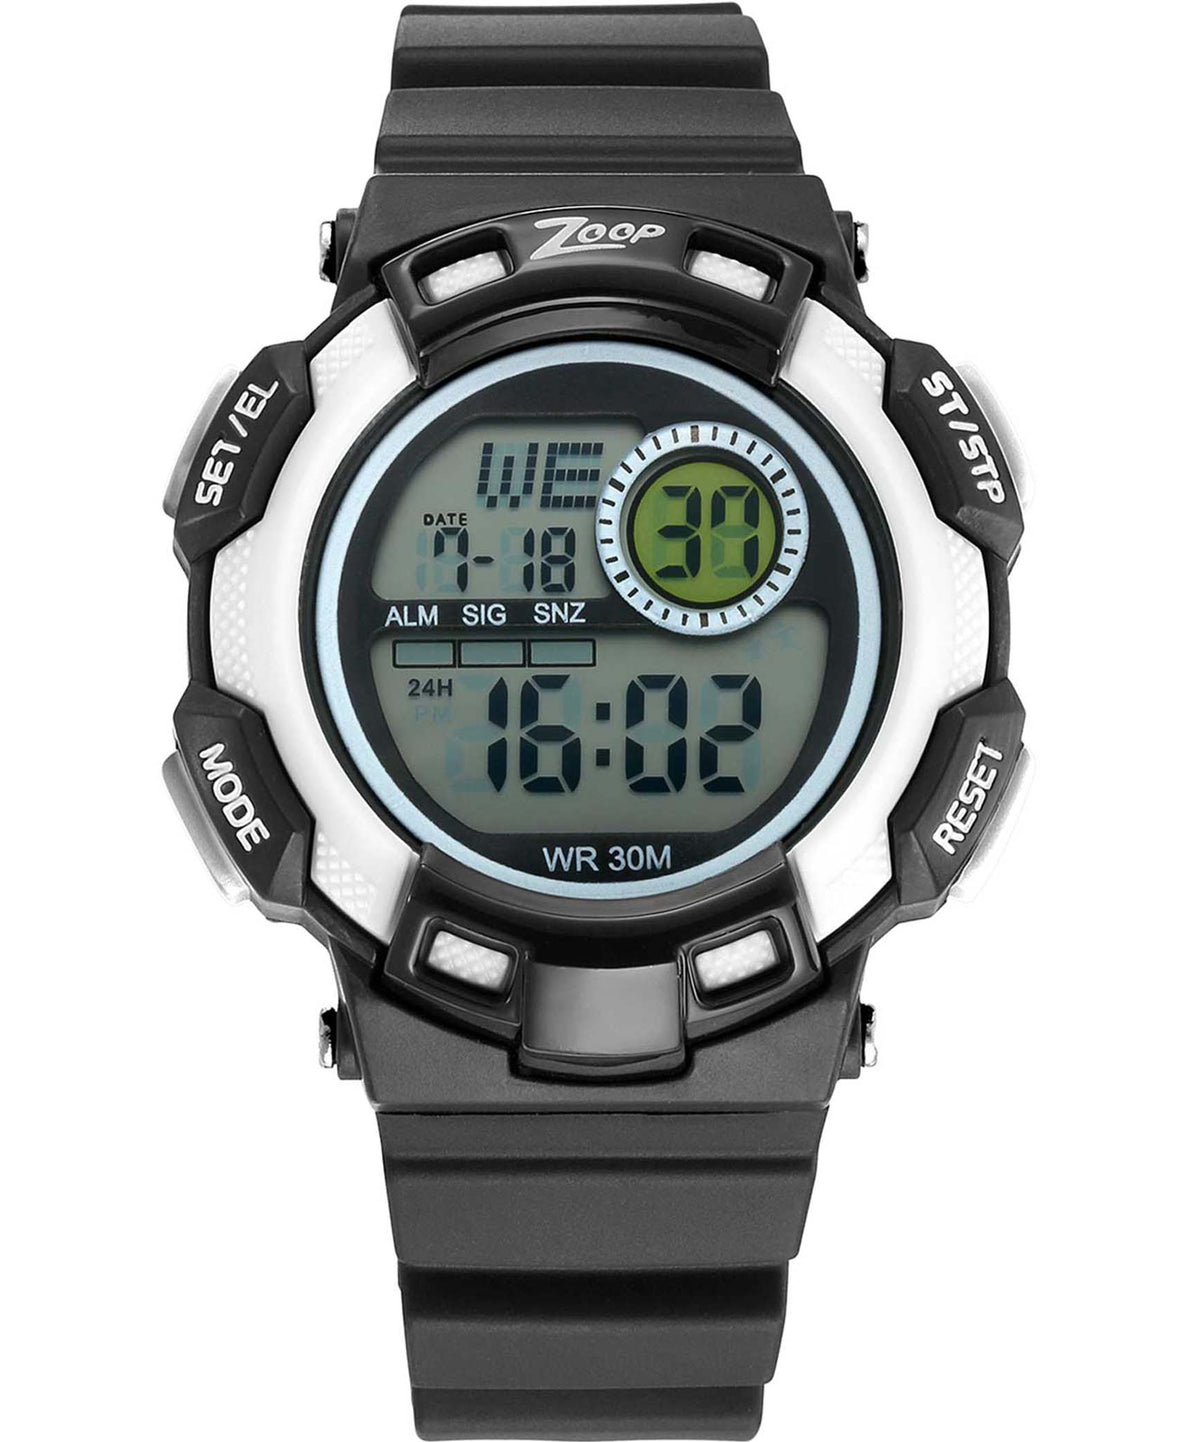 Zoop By Titan Kids Watch Collection Digital, Black Dial Black Plastic Band, 16009PP01